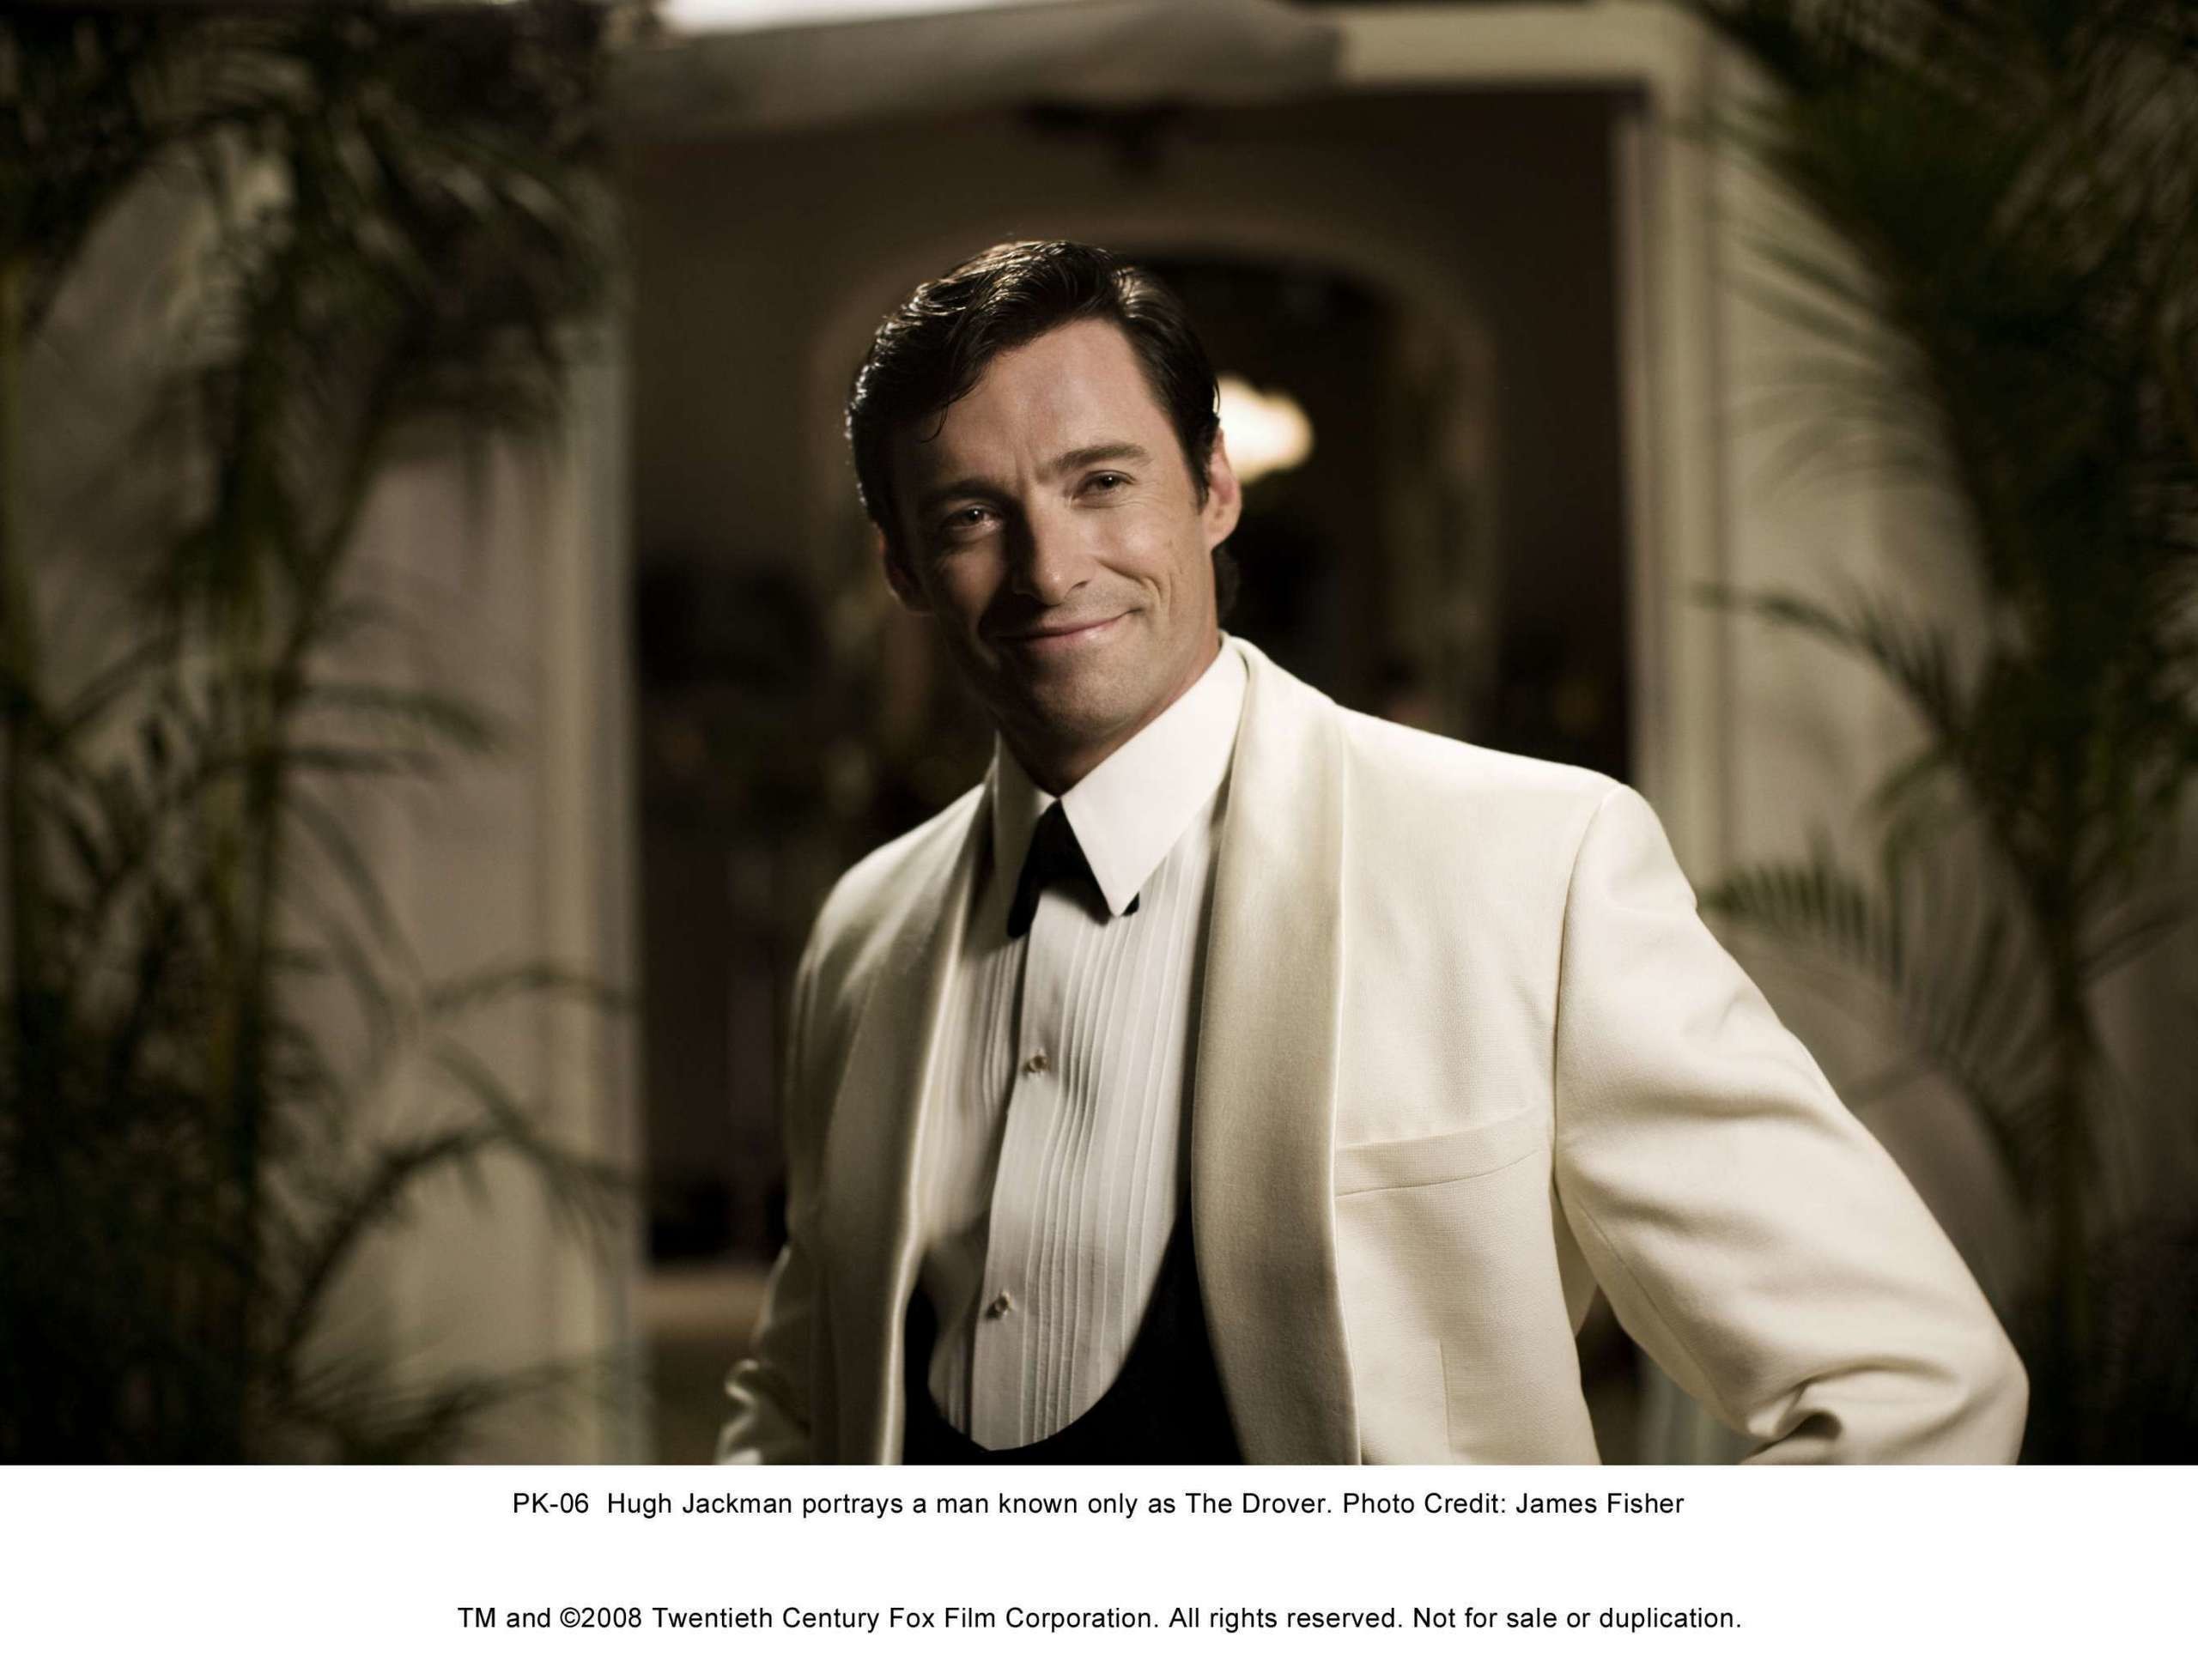 2560x1957 Why was Hugh Jackman a knockout in this suit on the set of Australia,  because